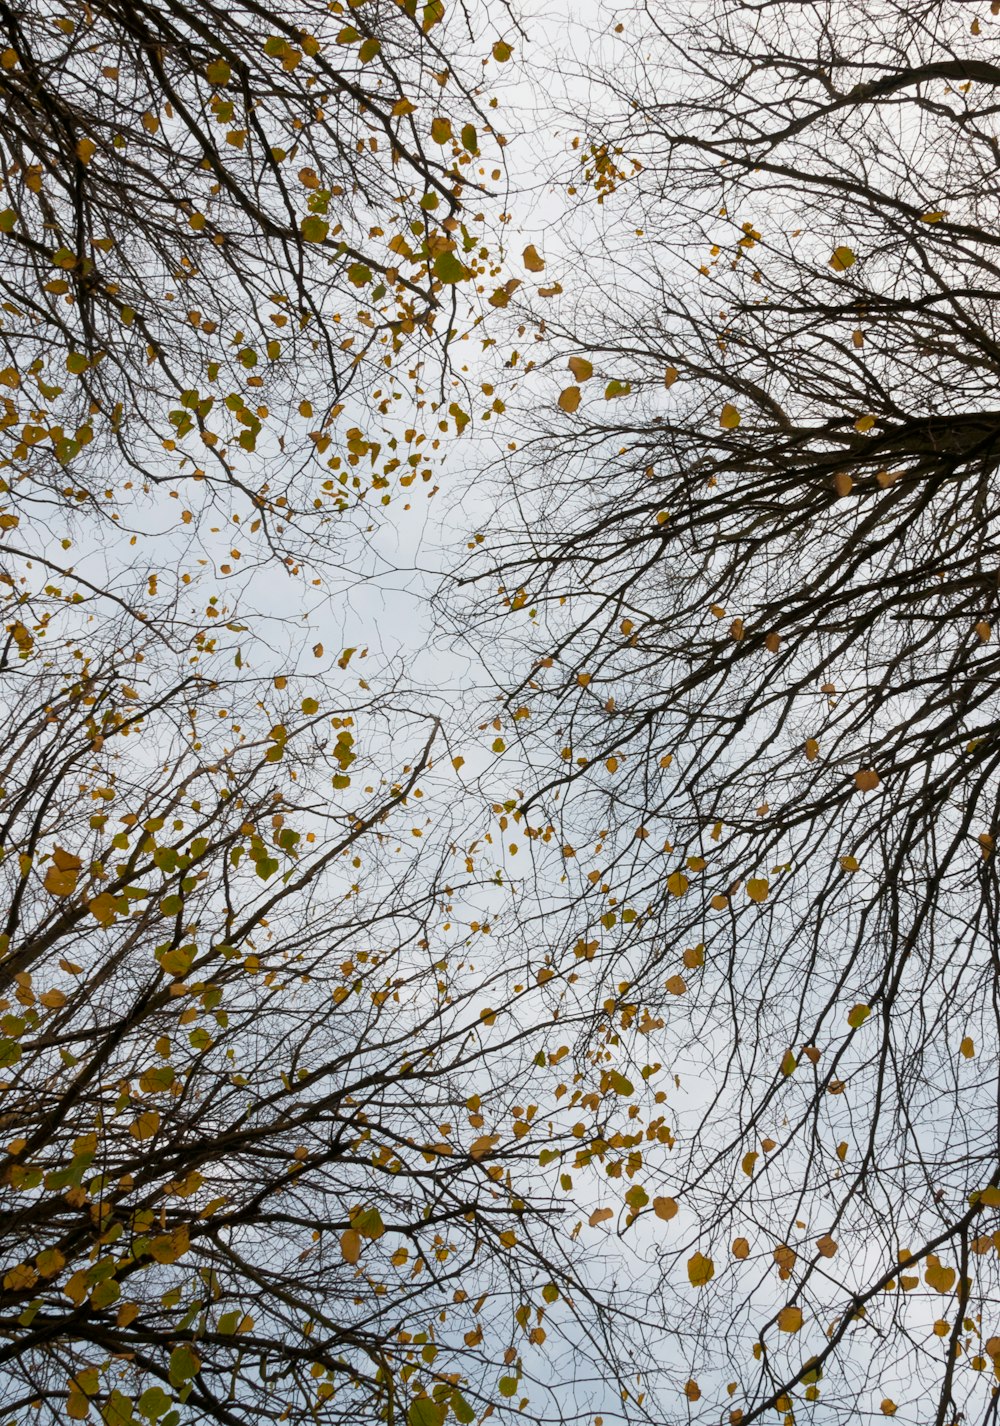 looking up at the tops of trees with leaves on them